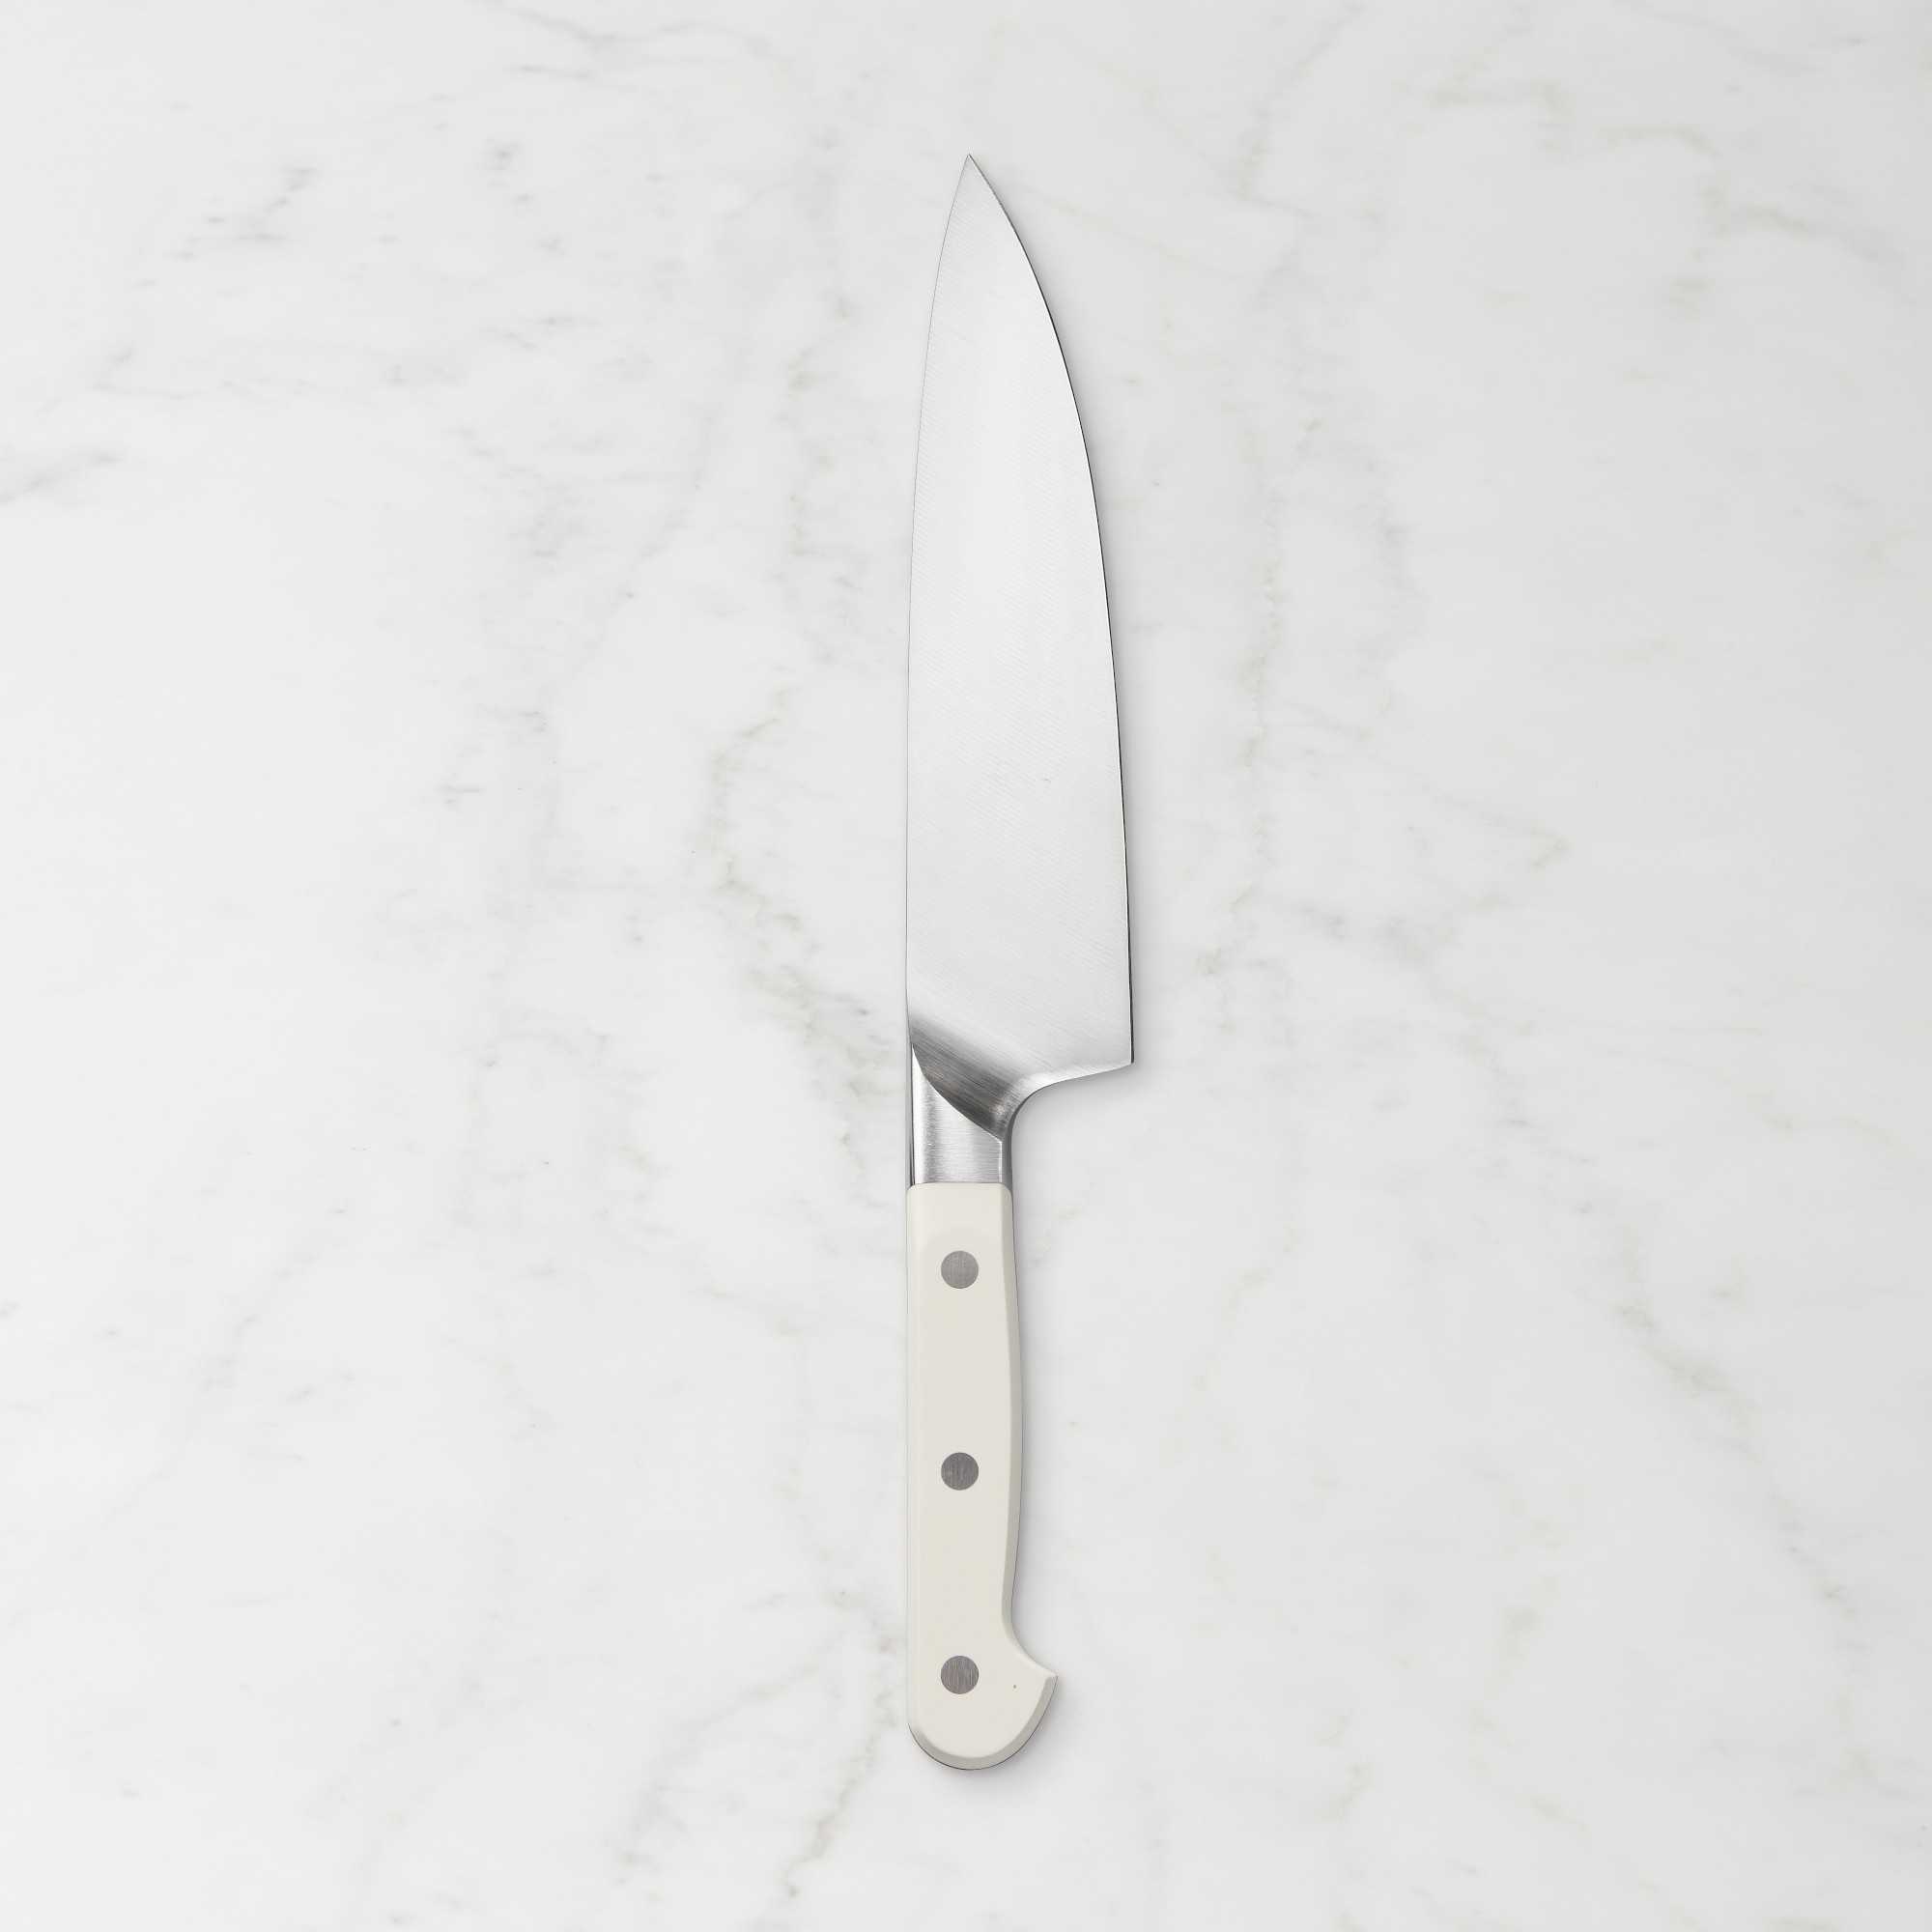 Zwilling Pro Le Blanc Chef's Knife, 7"